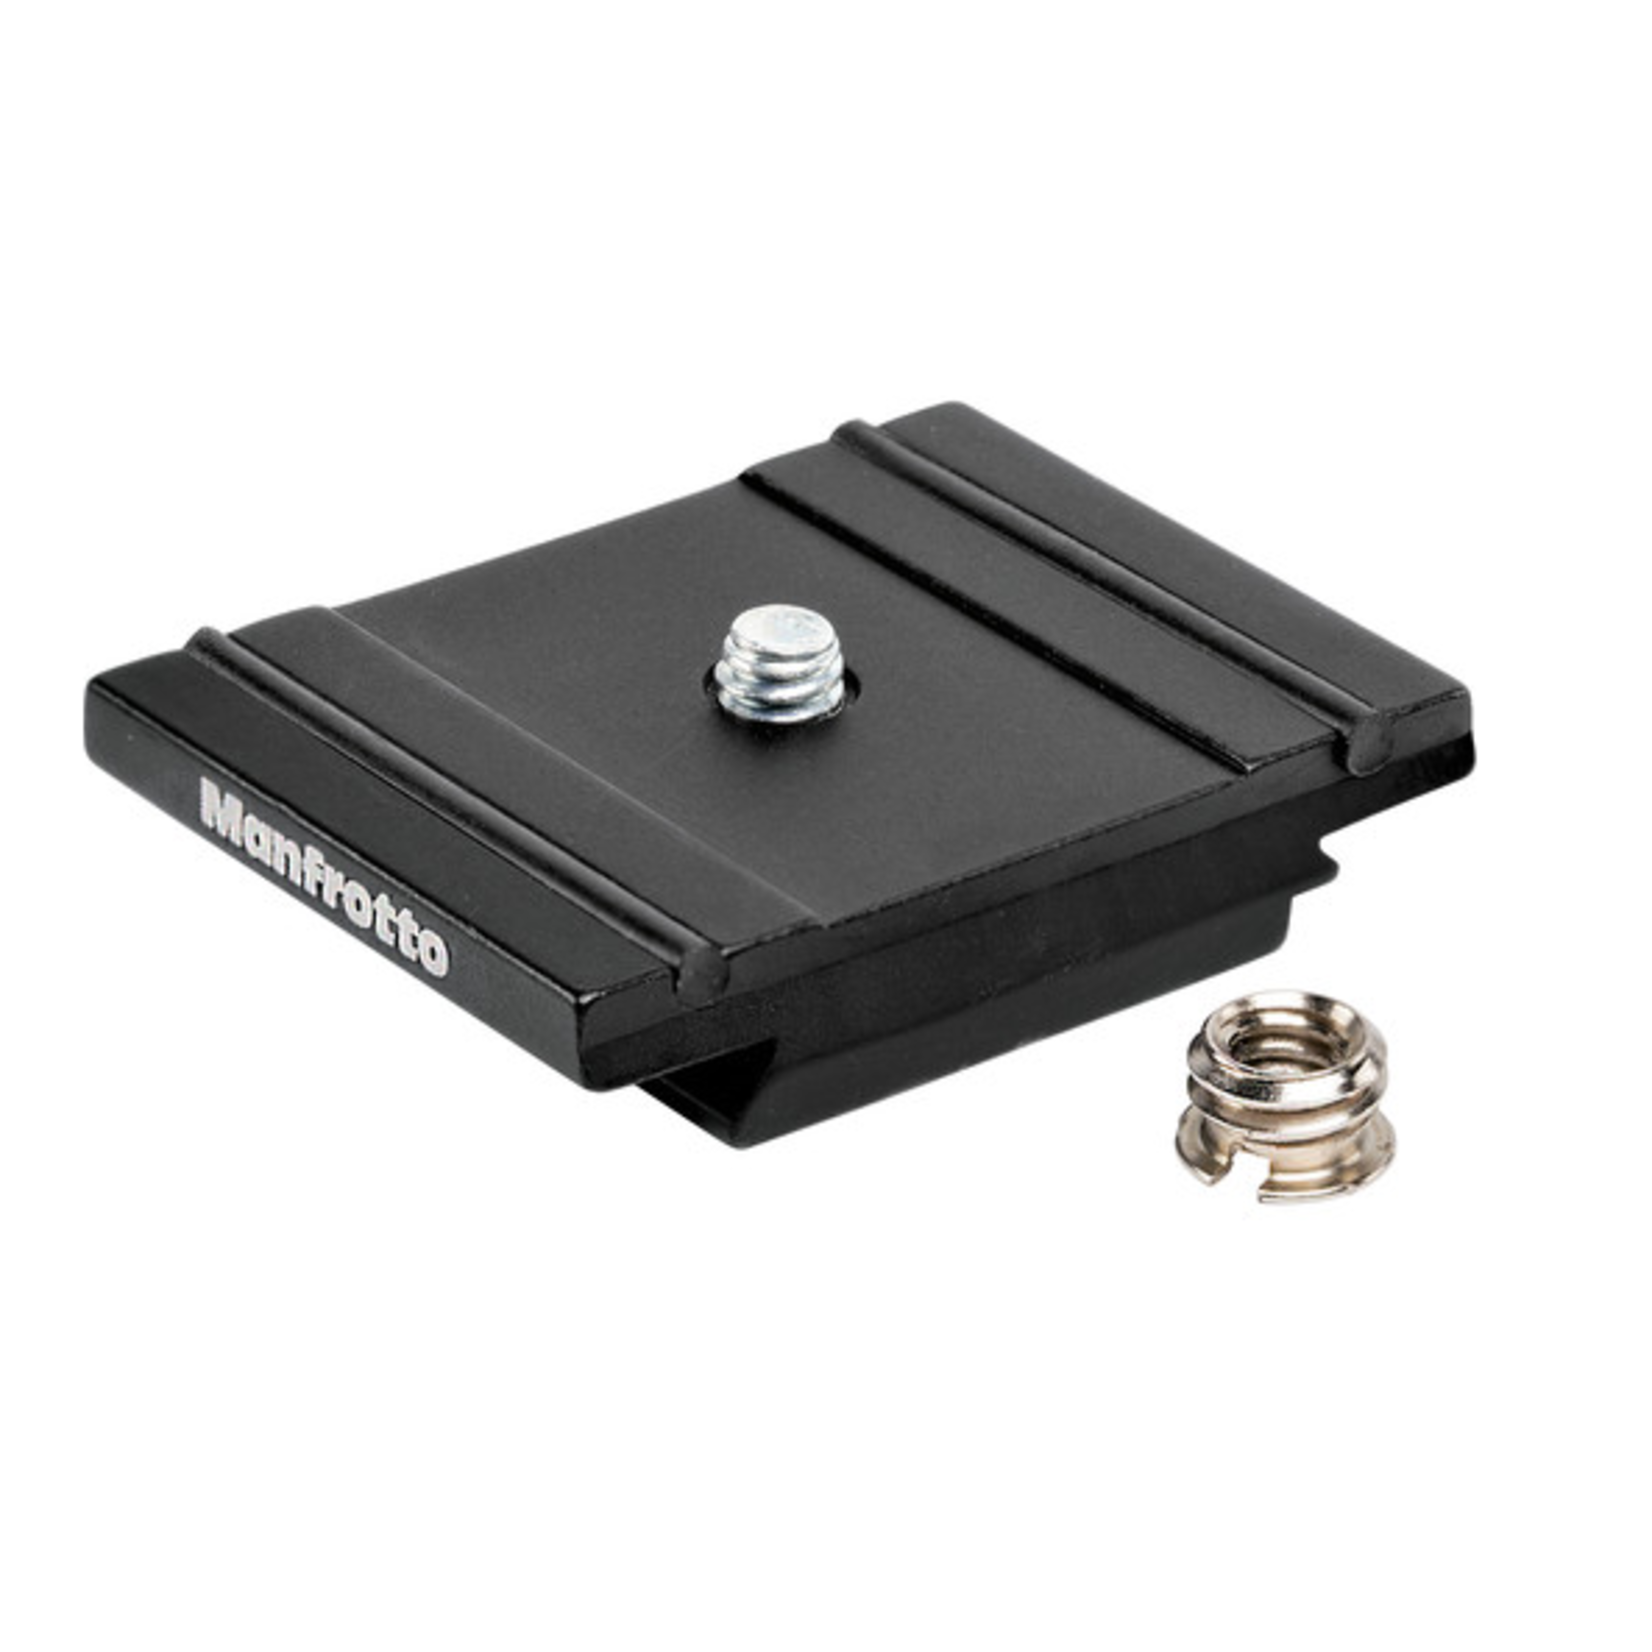 Manfrotto Manfrotto 200PL-Pro Aluminum Plate